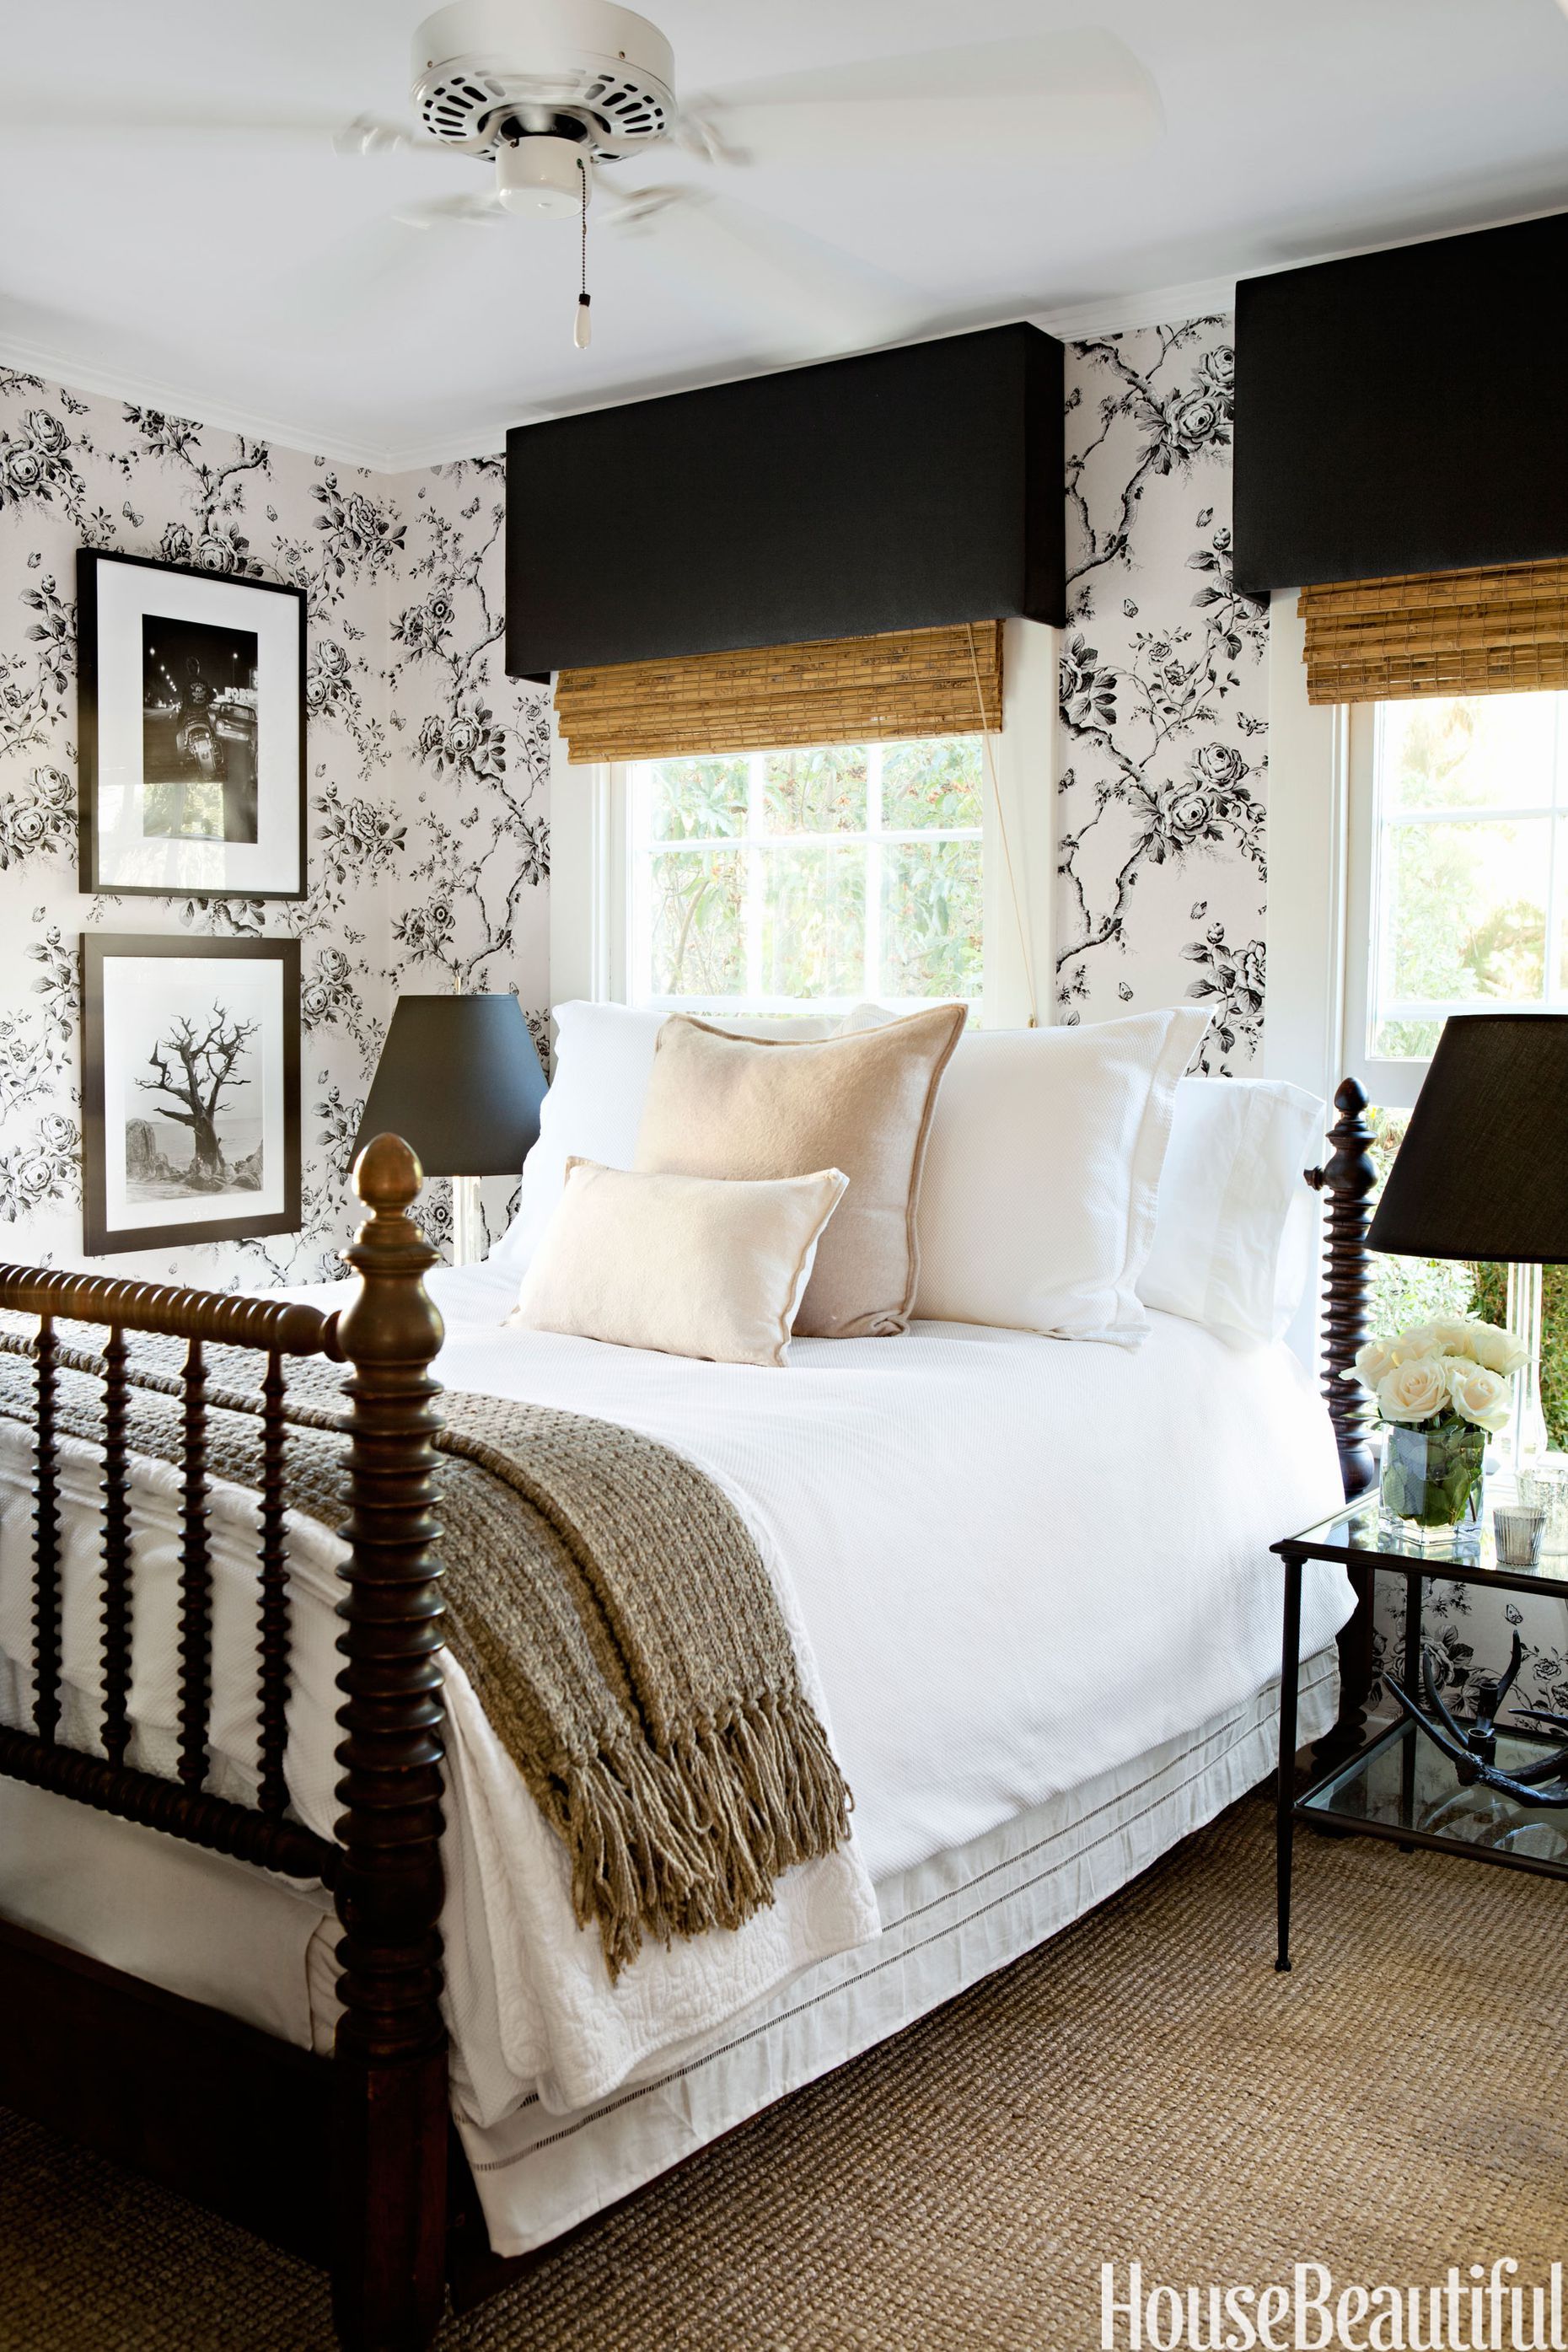 15 Beautiful Black And White Bedroom Ideas - Black And White Decor